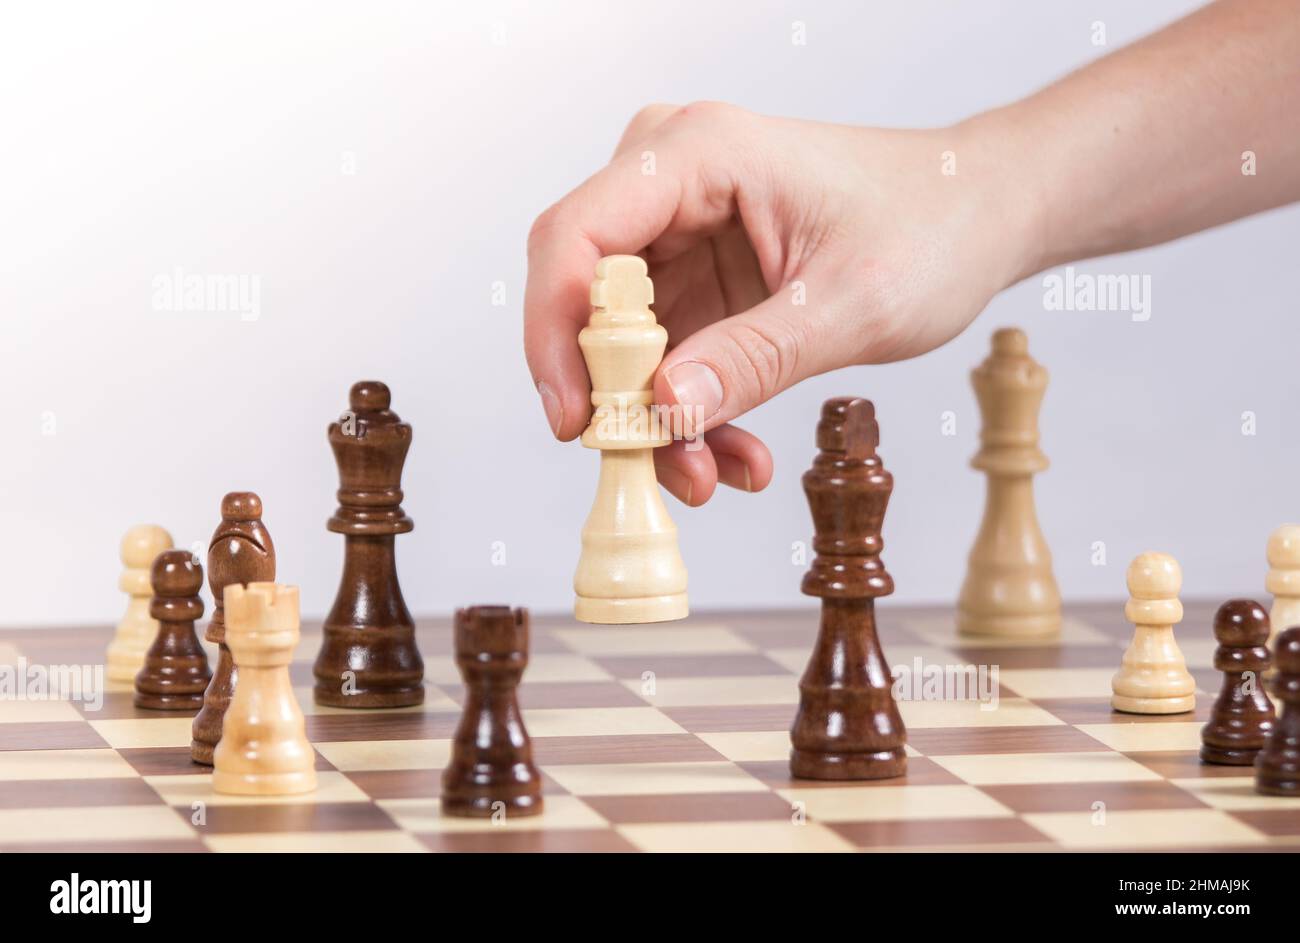 Hand Of A Man Taking A Chess Piece To Make The Next Move In A Chess Game.  Close Up. Spring Day Outside. Stock Photo, Picture and Royalty Free Image.  Image 198493640.